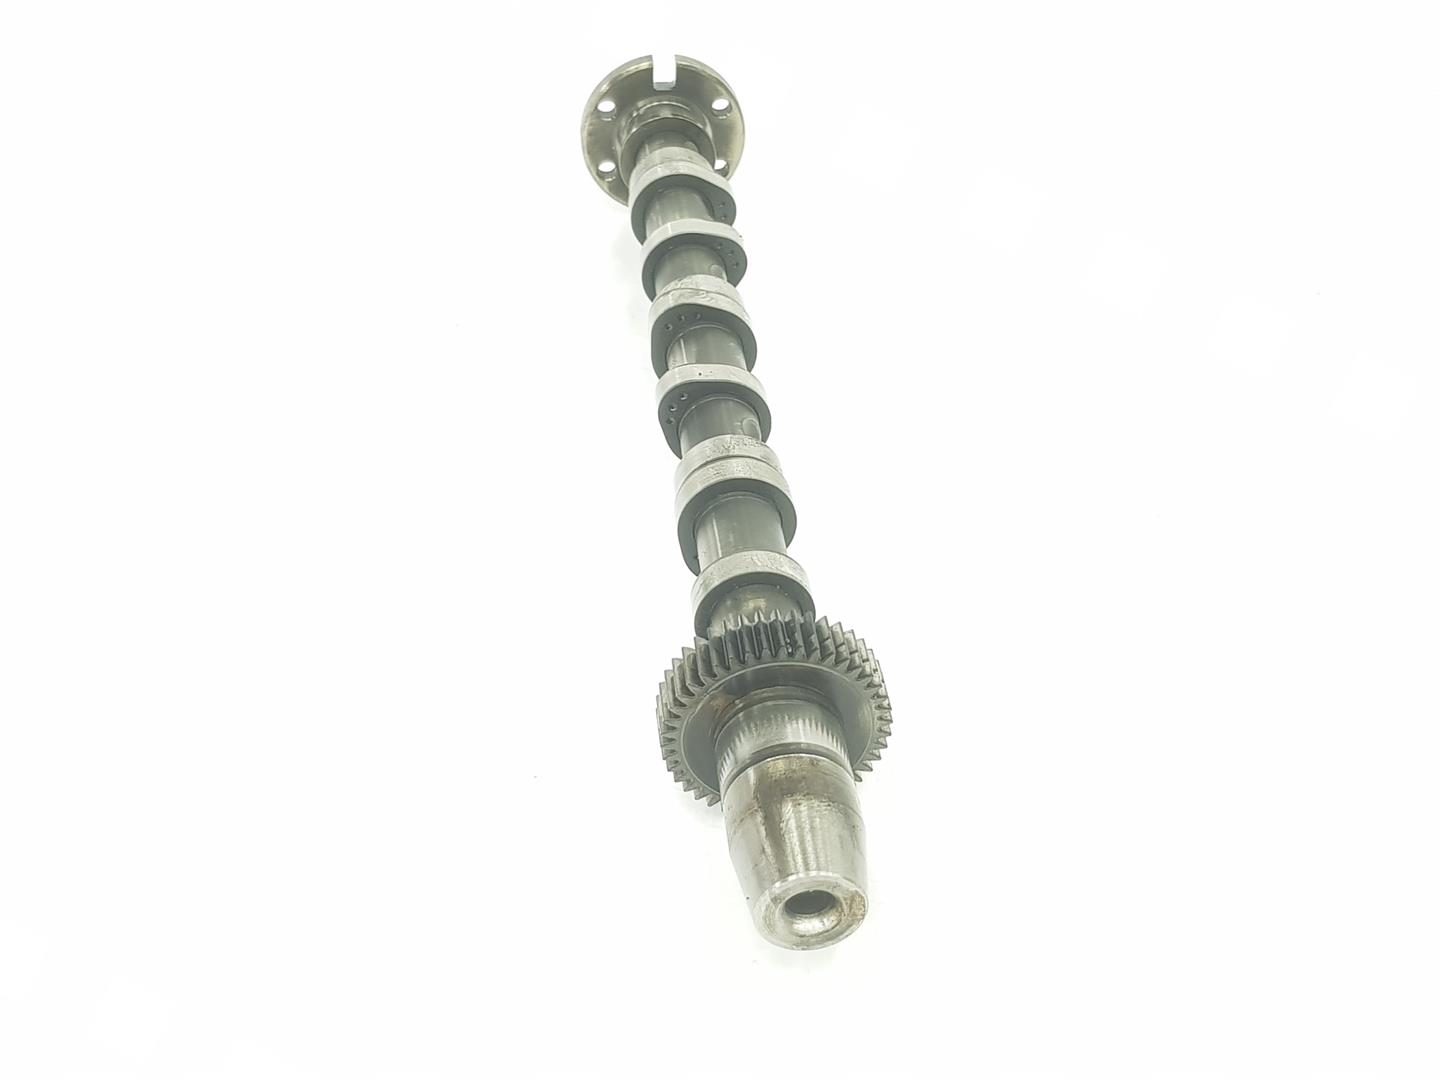 AUDI A6 C6/4F (2004-2011) Exhaust Camshaft 059109022BE, 059109022BE 21675963